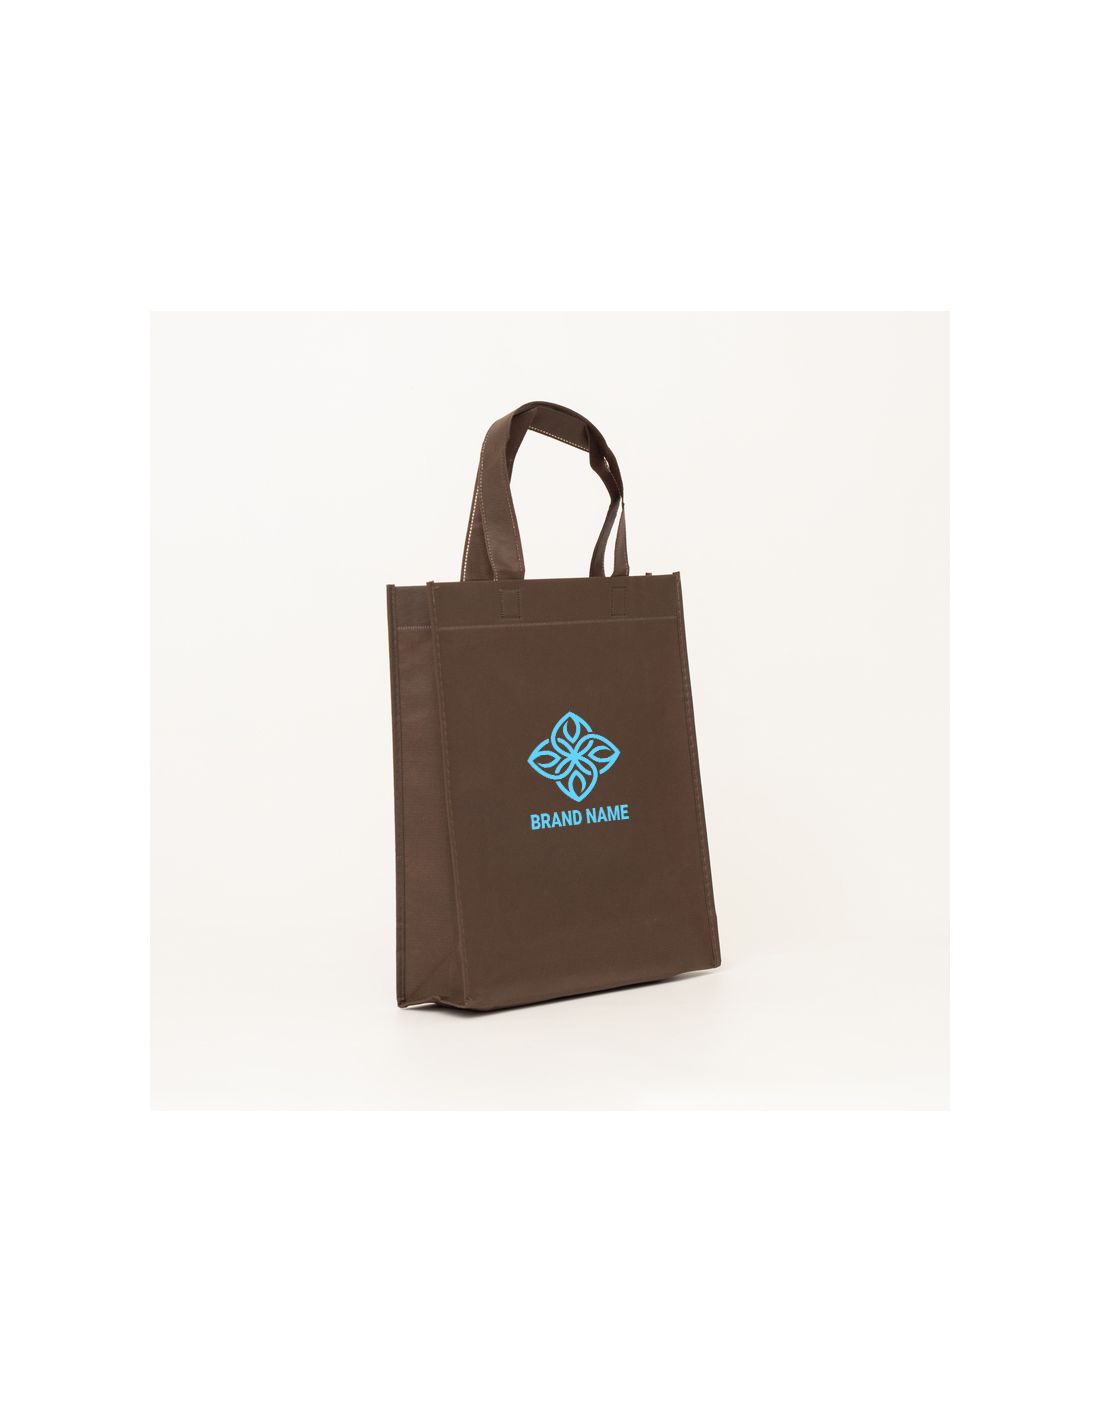 Customized Customized non-woven bag 30x10x35 CM | NON-WOVEN TNT LUS BAG| SCREEN PRINTING ON ONE SIDE IN ONE COLOR